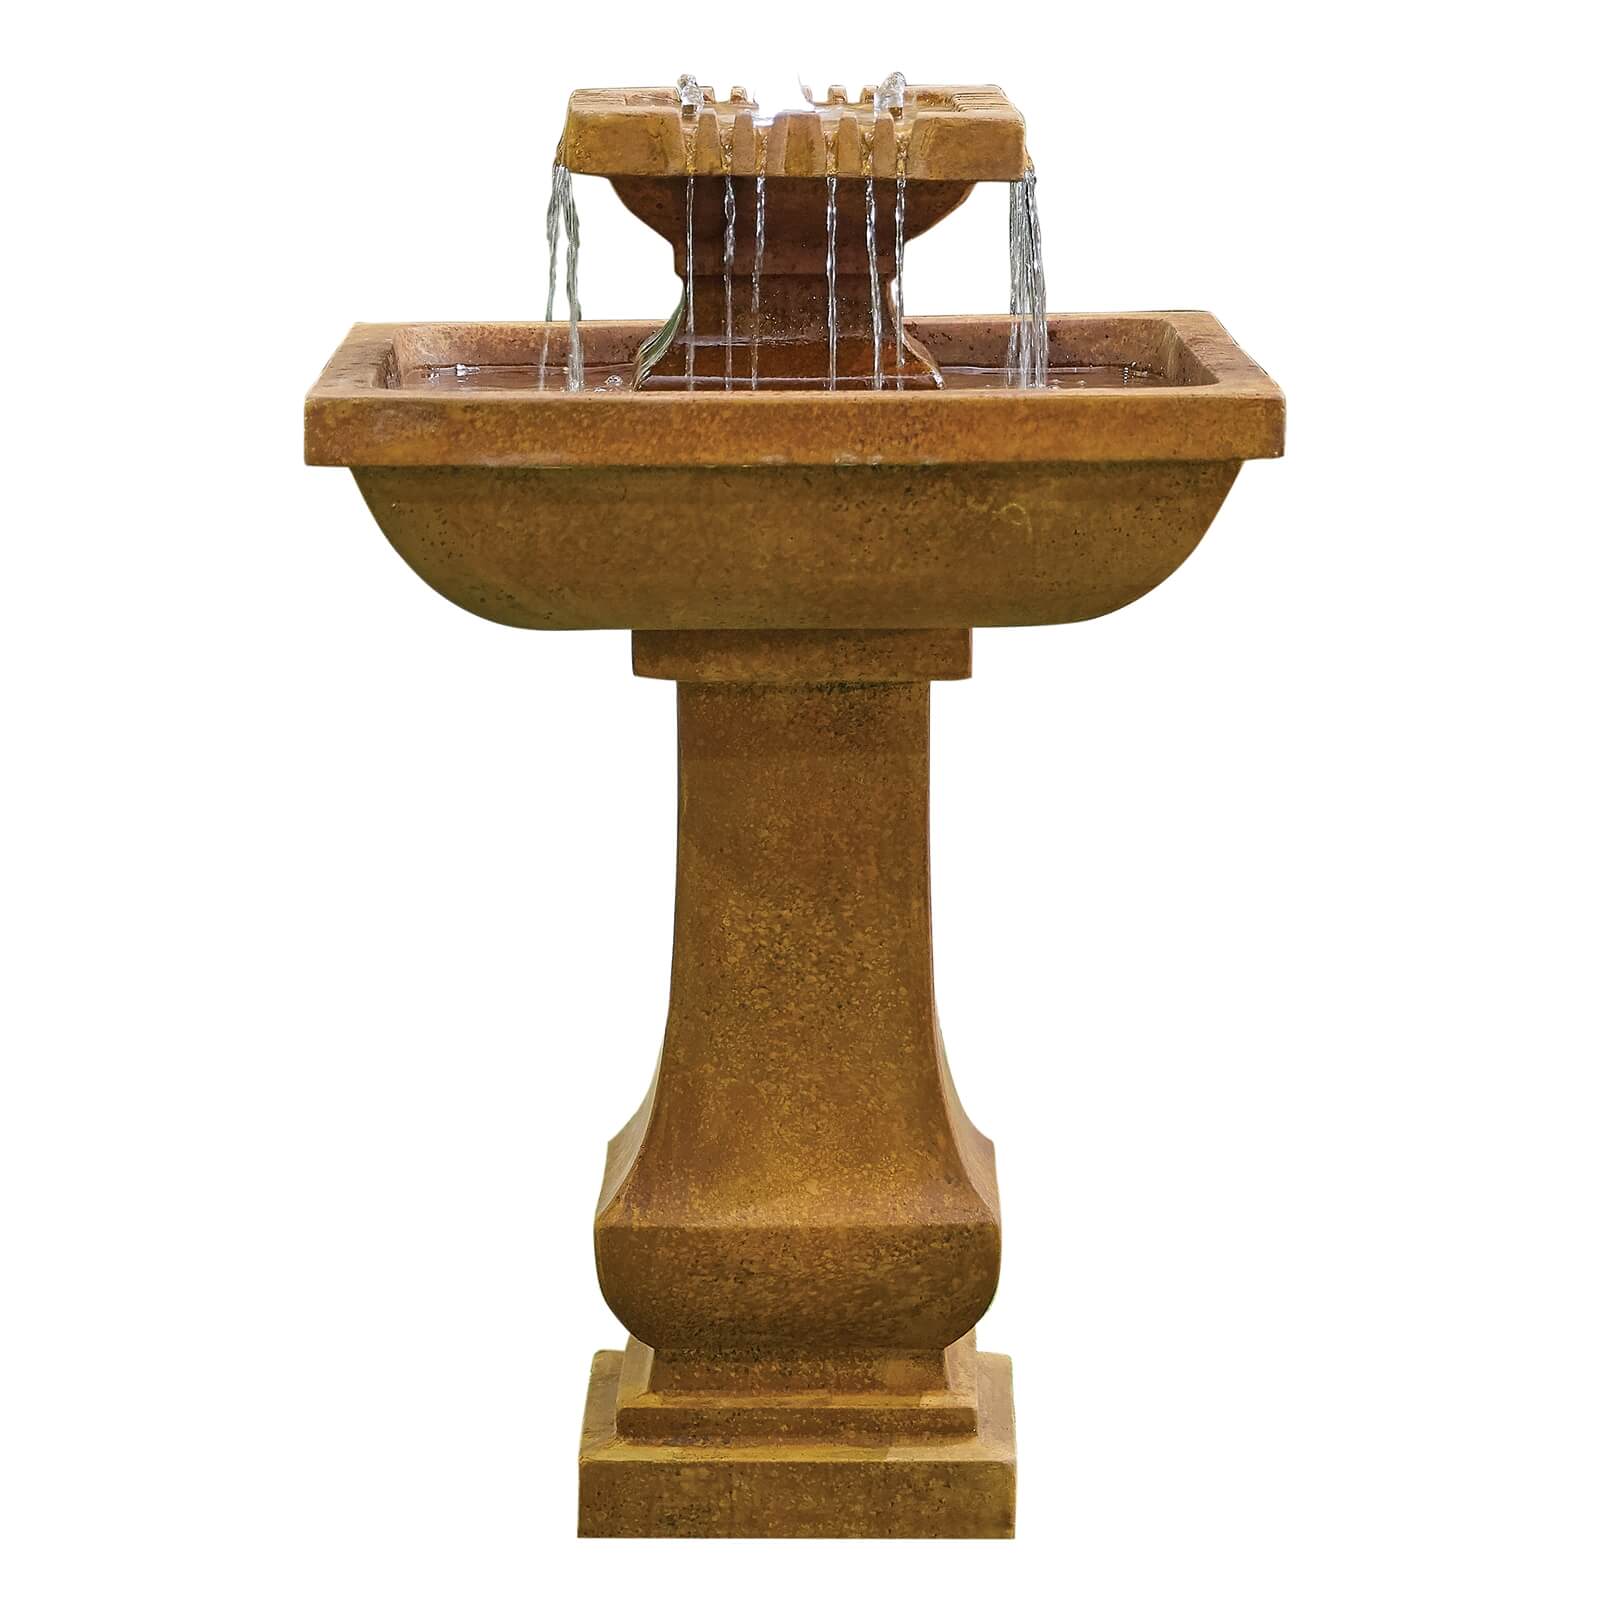 Stylish Fountains Solstice Water Feature (Includes LEDS)